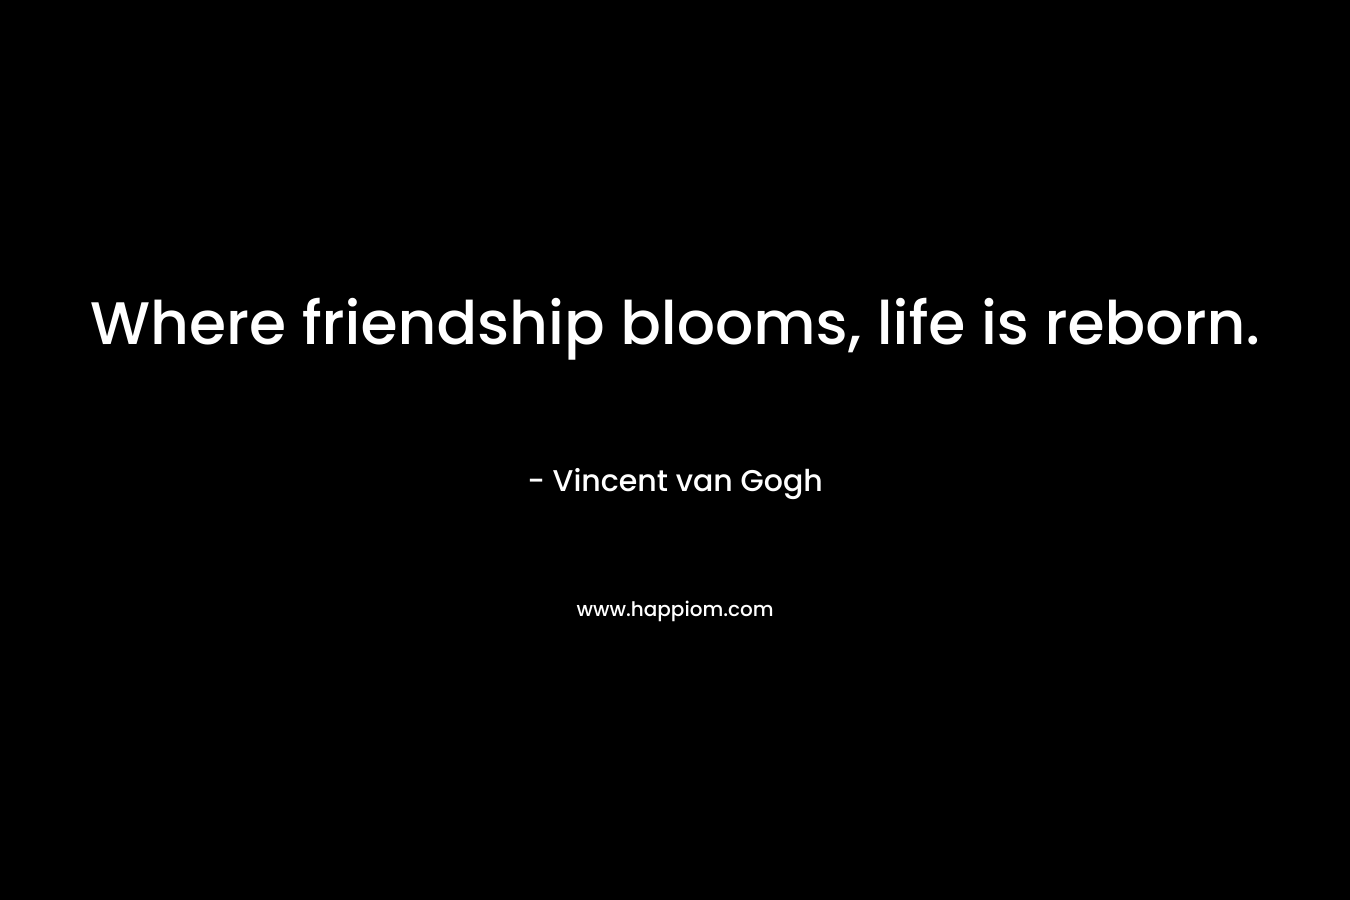 Where friendship blooms, life is reborn.